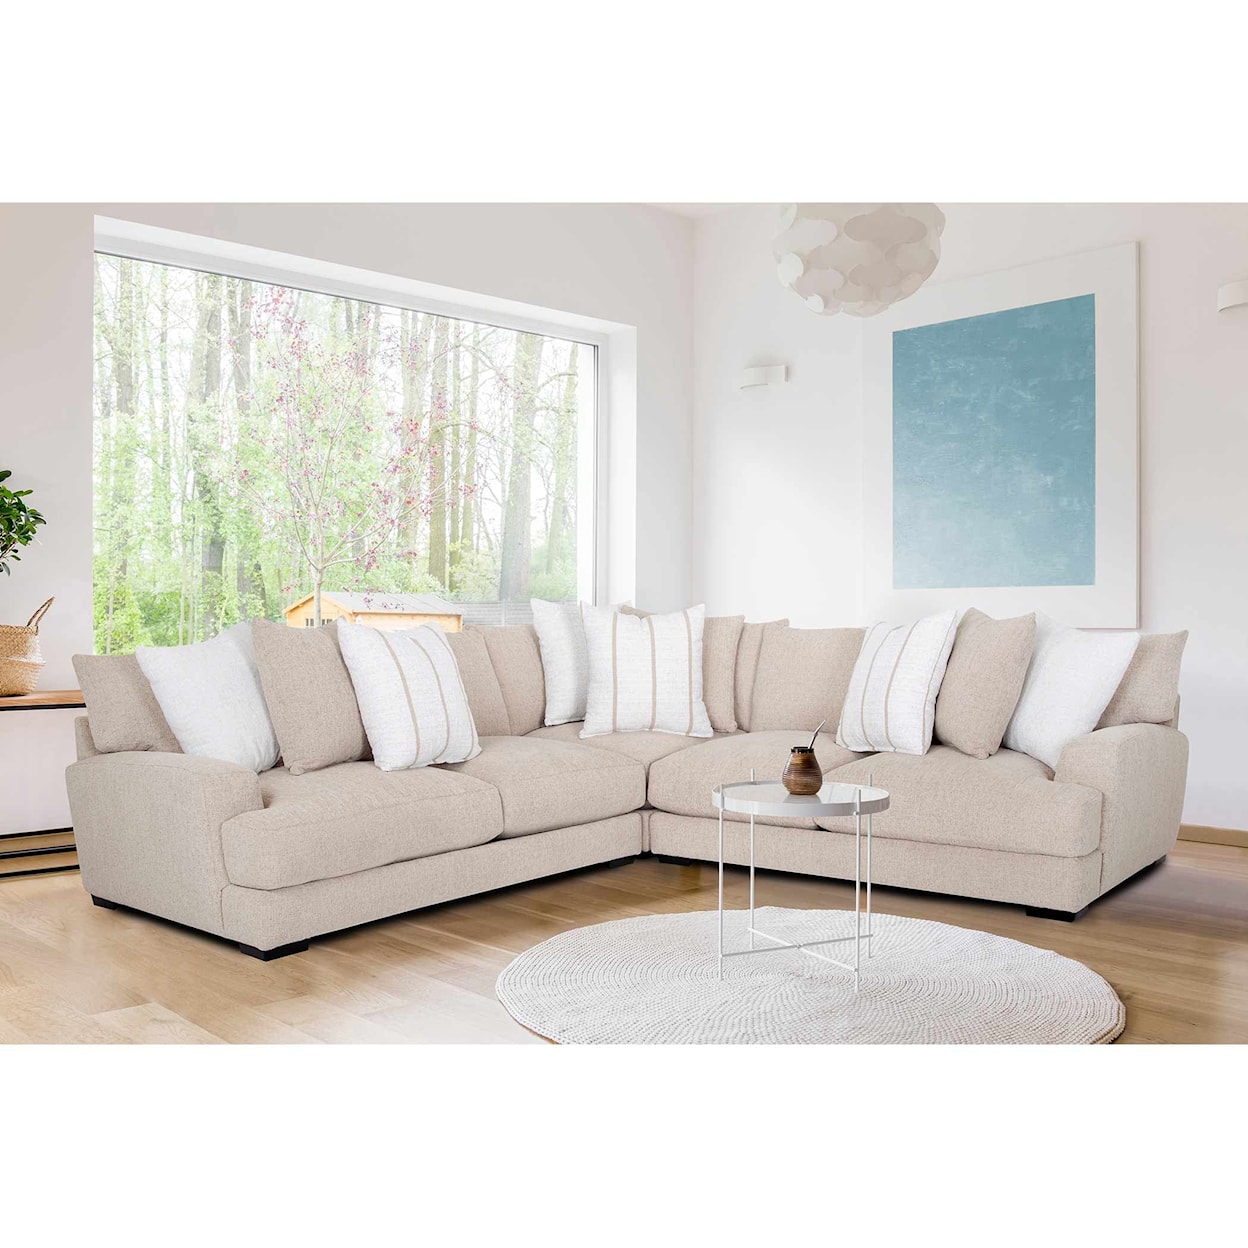 Franklin 809 Shay 3-Piece Sectional Sofa